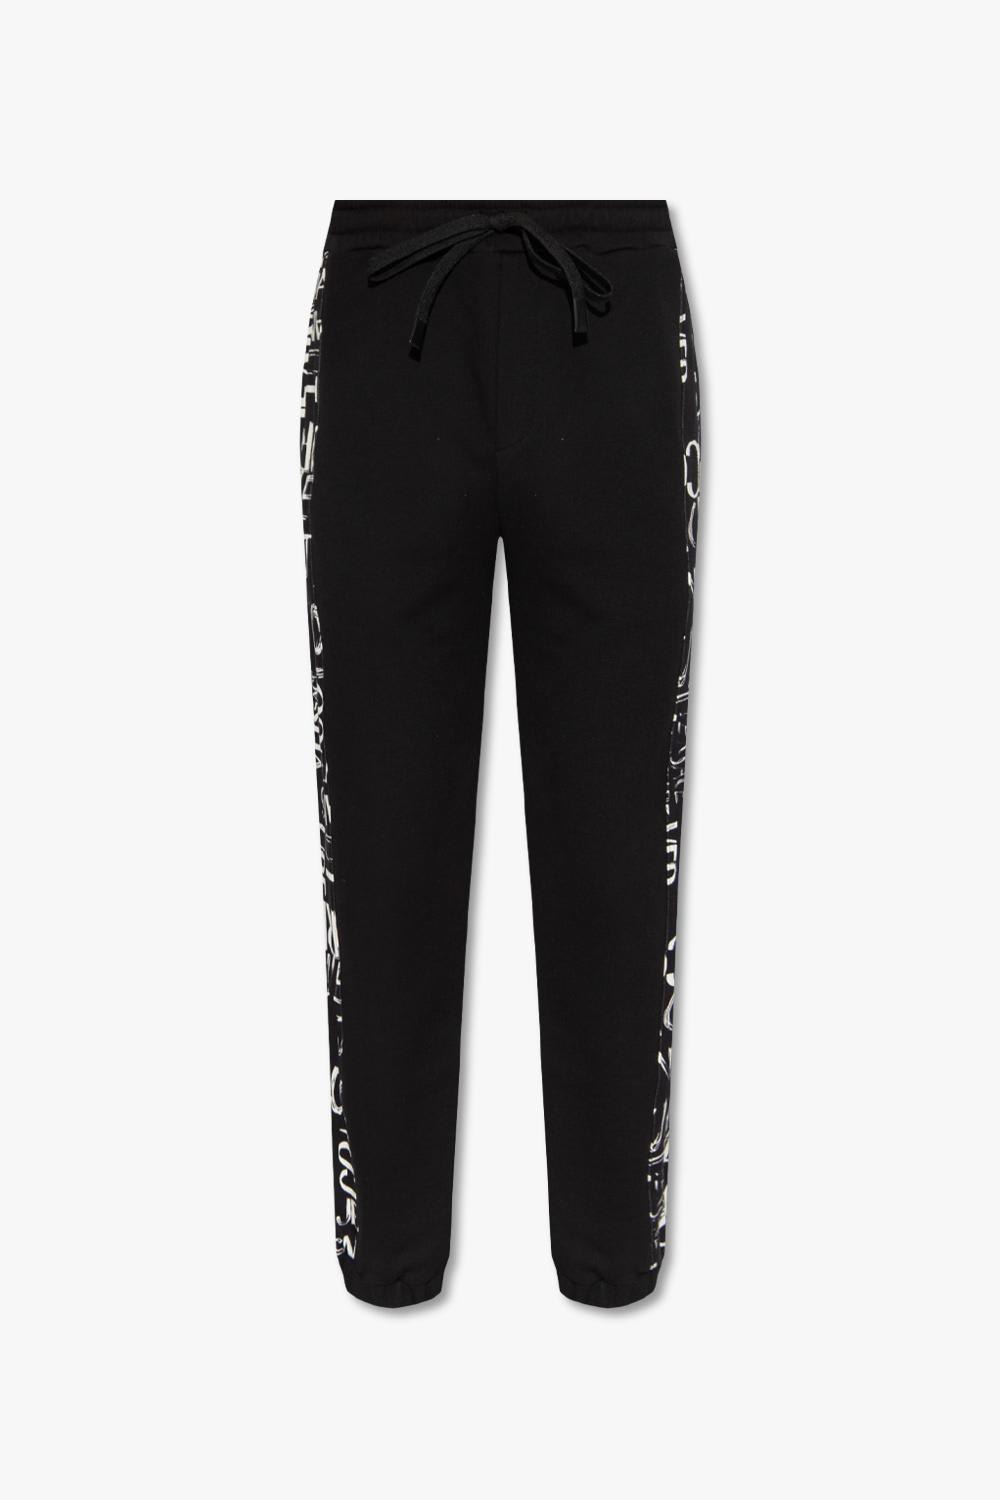 VERSACE JEANS COUTURE SWEATPANTS WITH LOGO